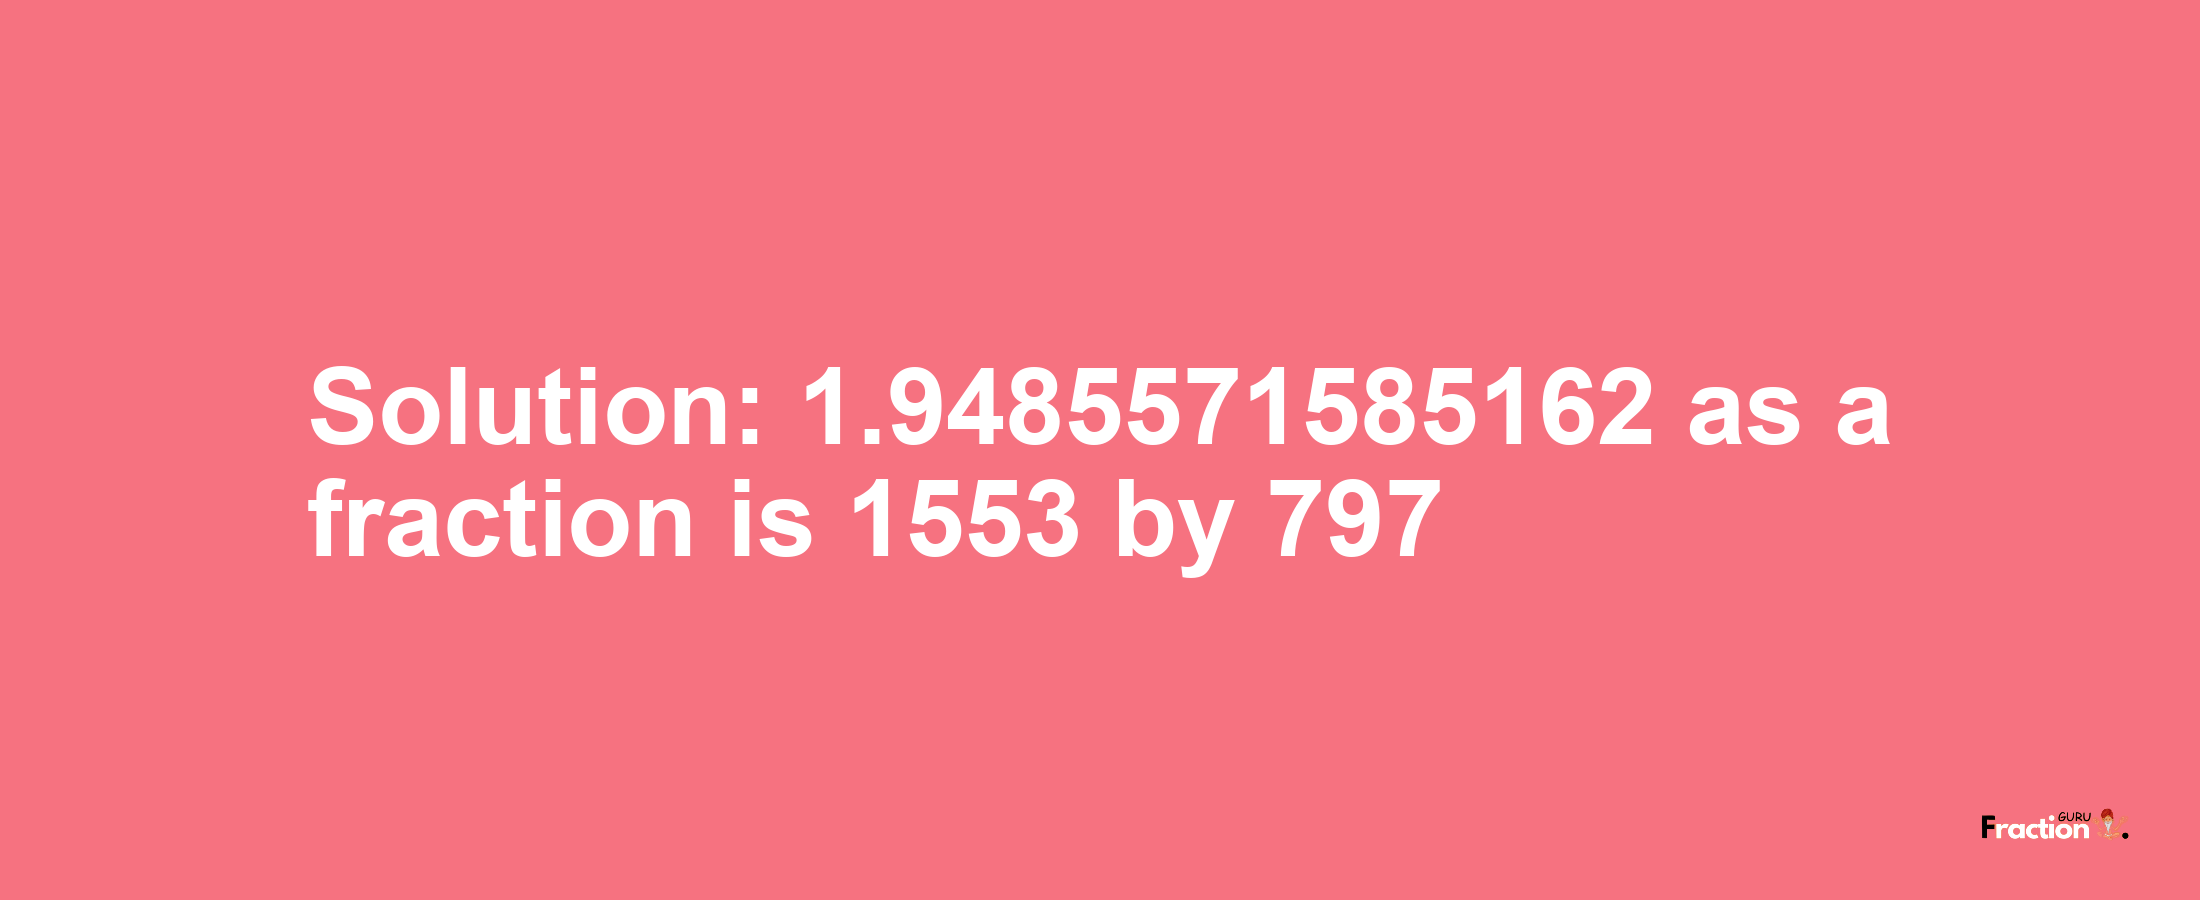 Solution:1.9485571585162 as a fraction is 1553/797